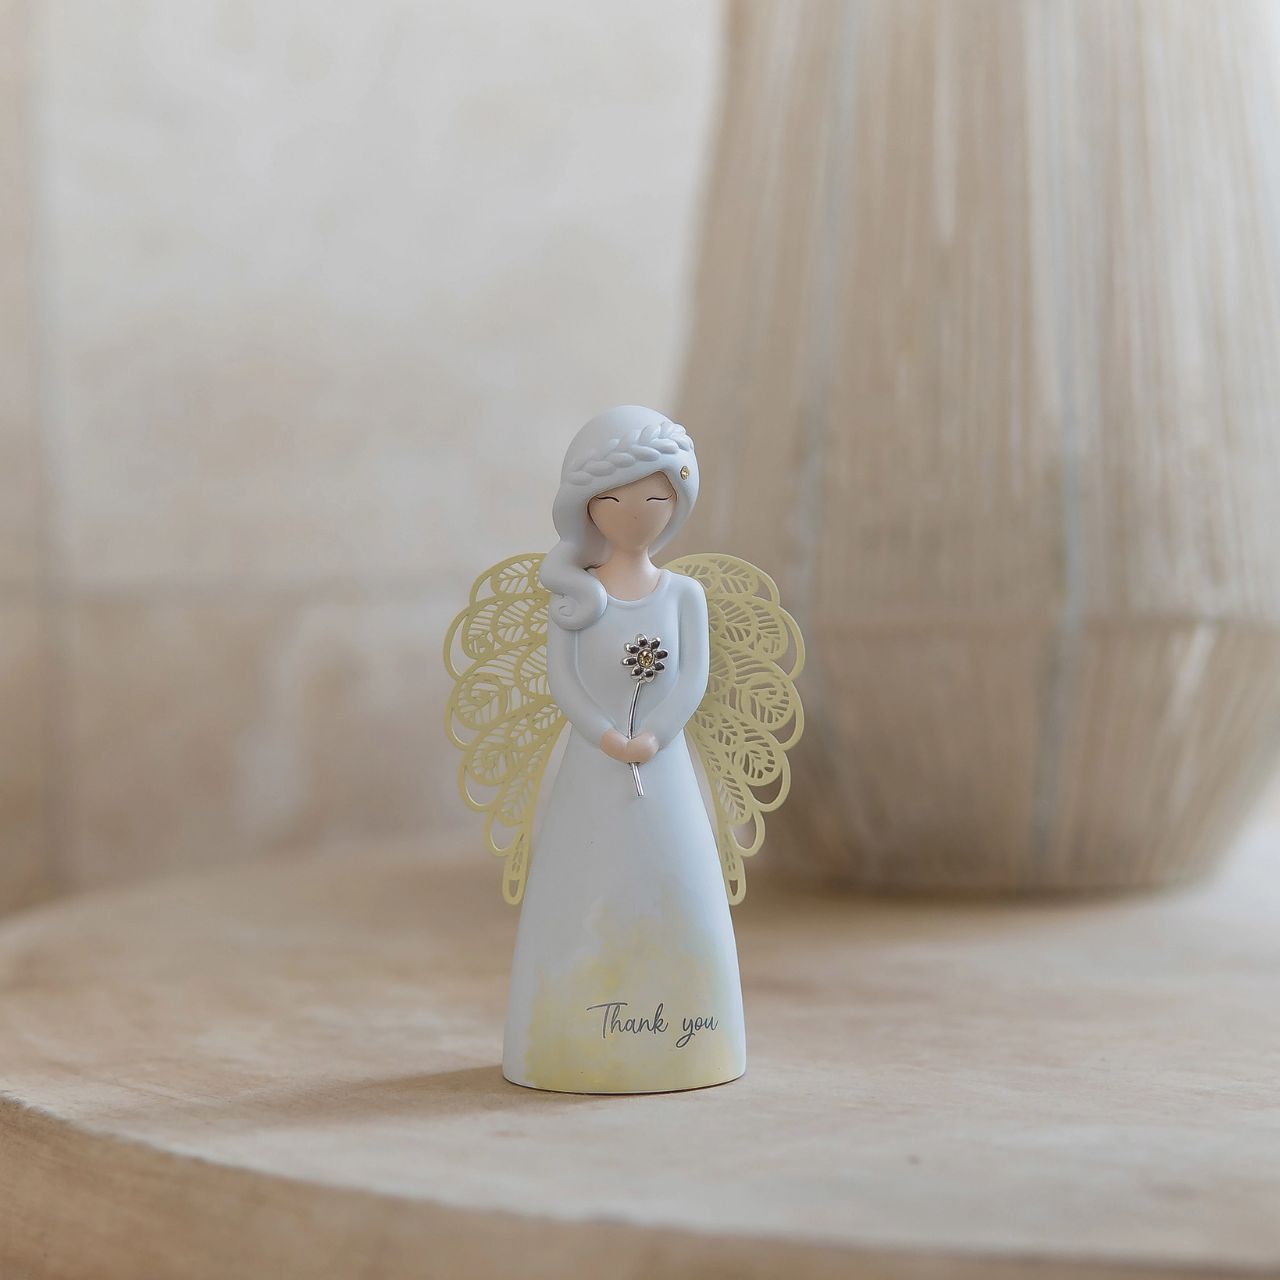 You Are An Angel Thank You Figurine  Looking for a thoughtful gift that's both beautiful and meaningful. These stunning angels are the perfect way to show someone special just how much they mean to you. Standing 12.5cm tall, they are perfect as a gift and home decoration.